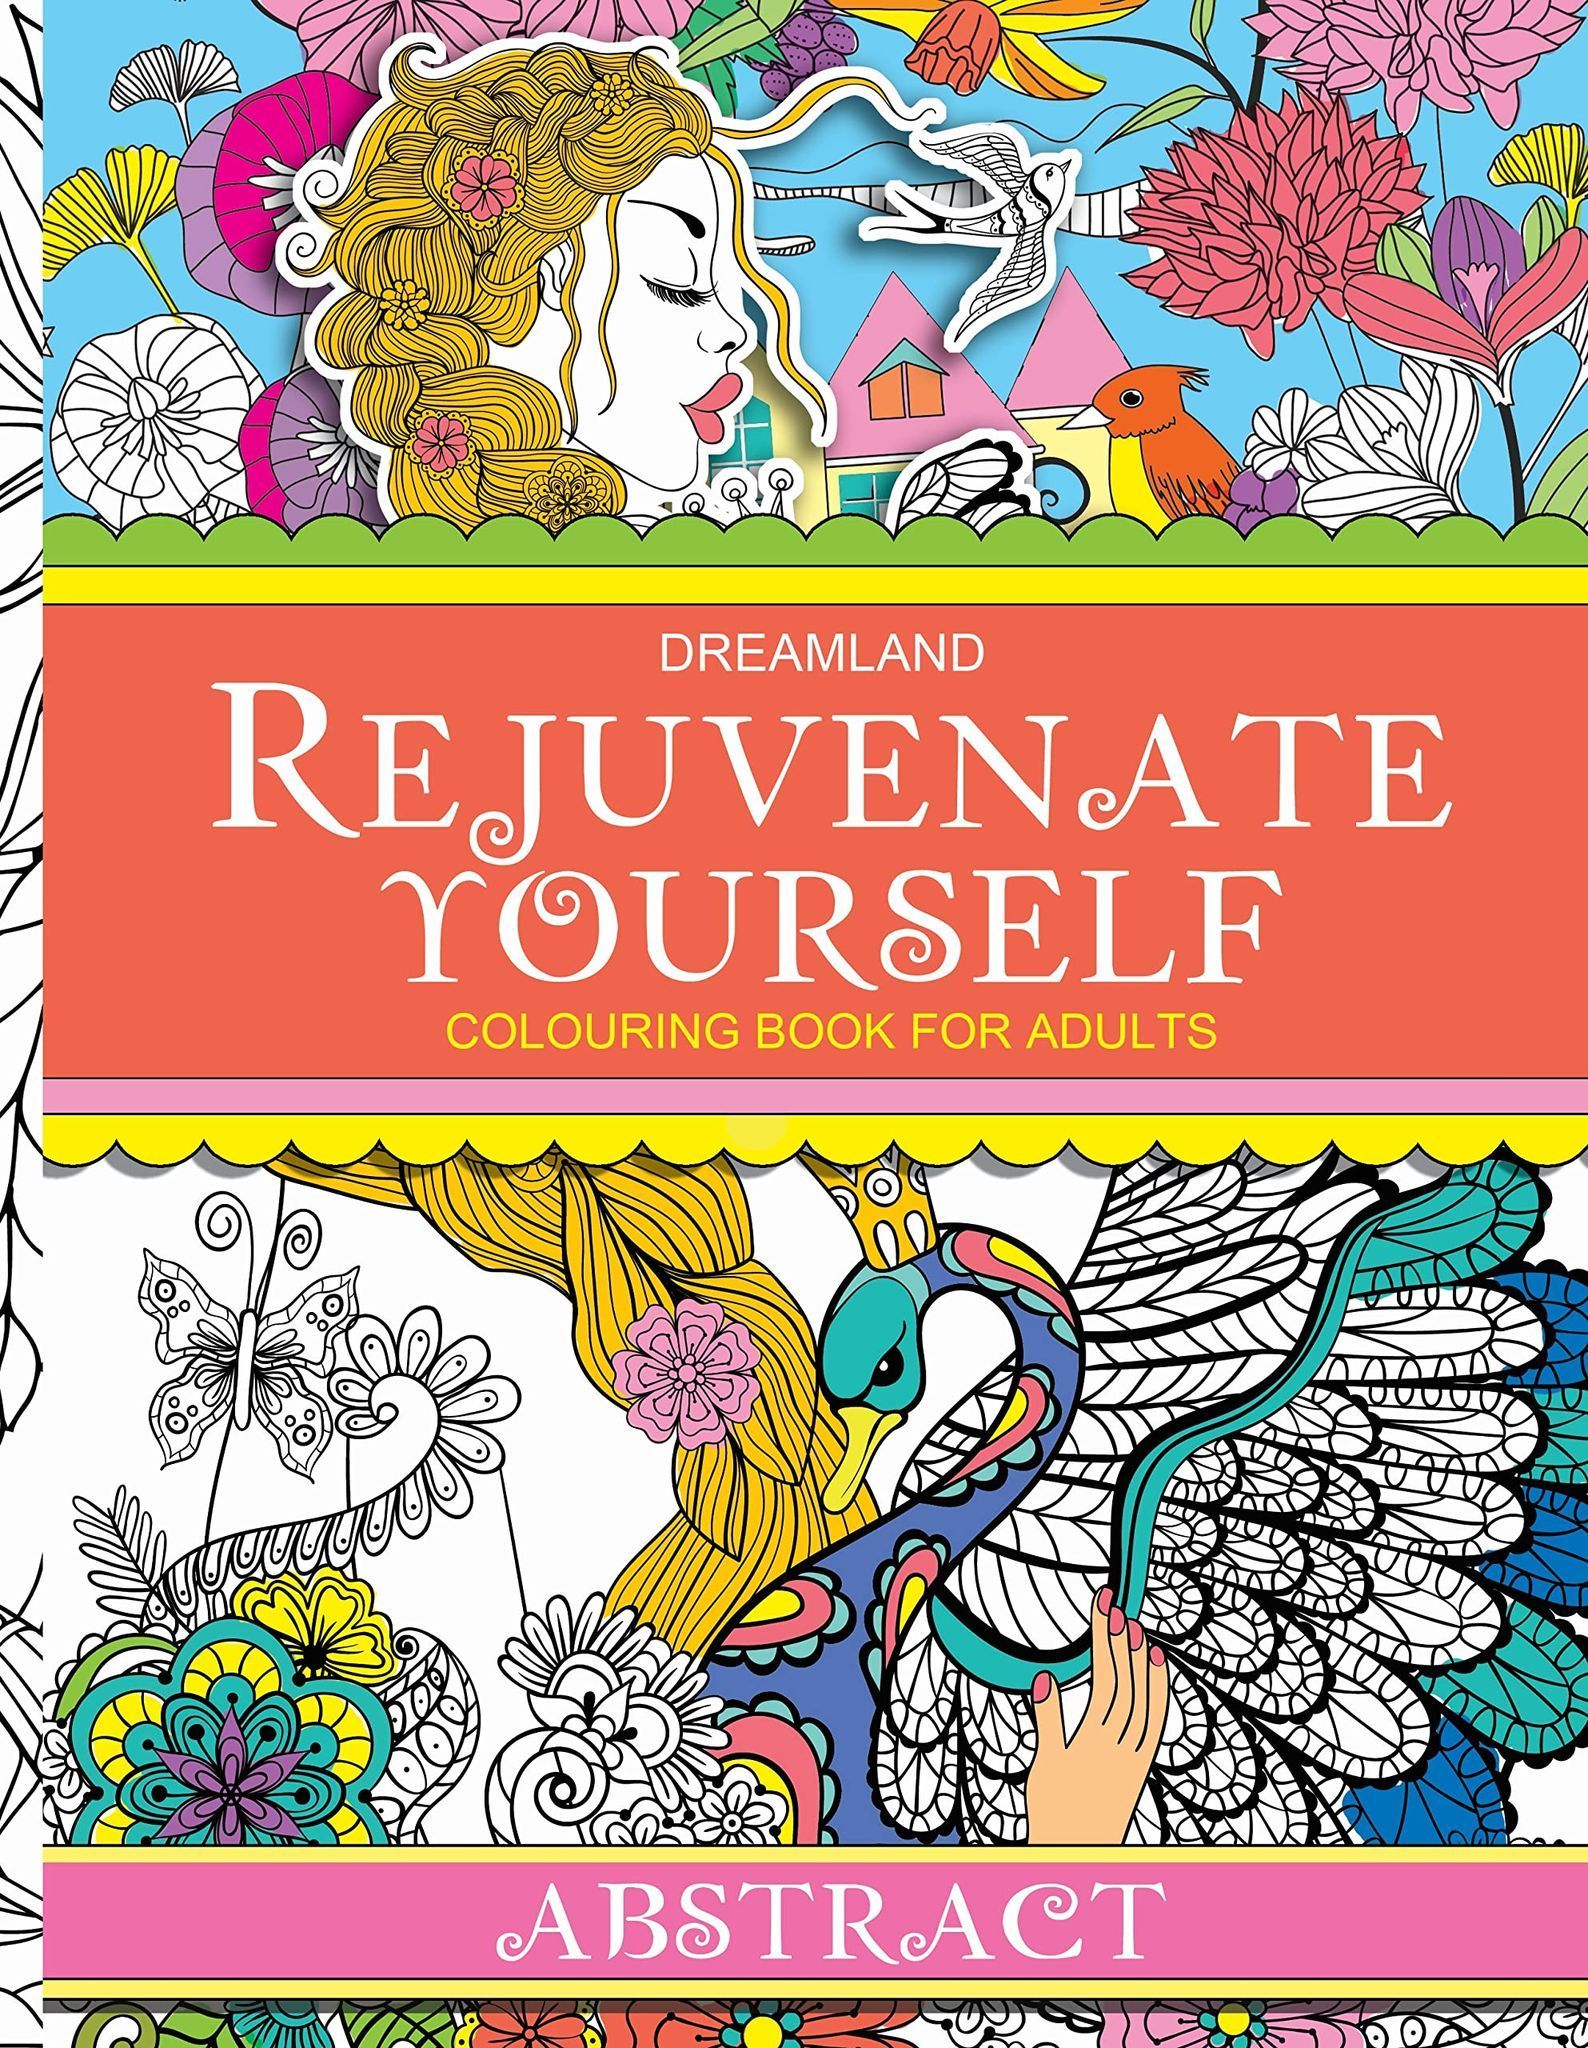 Rejuvenate yourself colouring abstract [Unknown Binding] NA